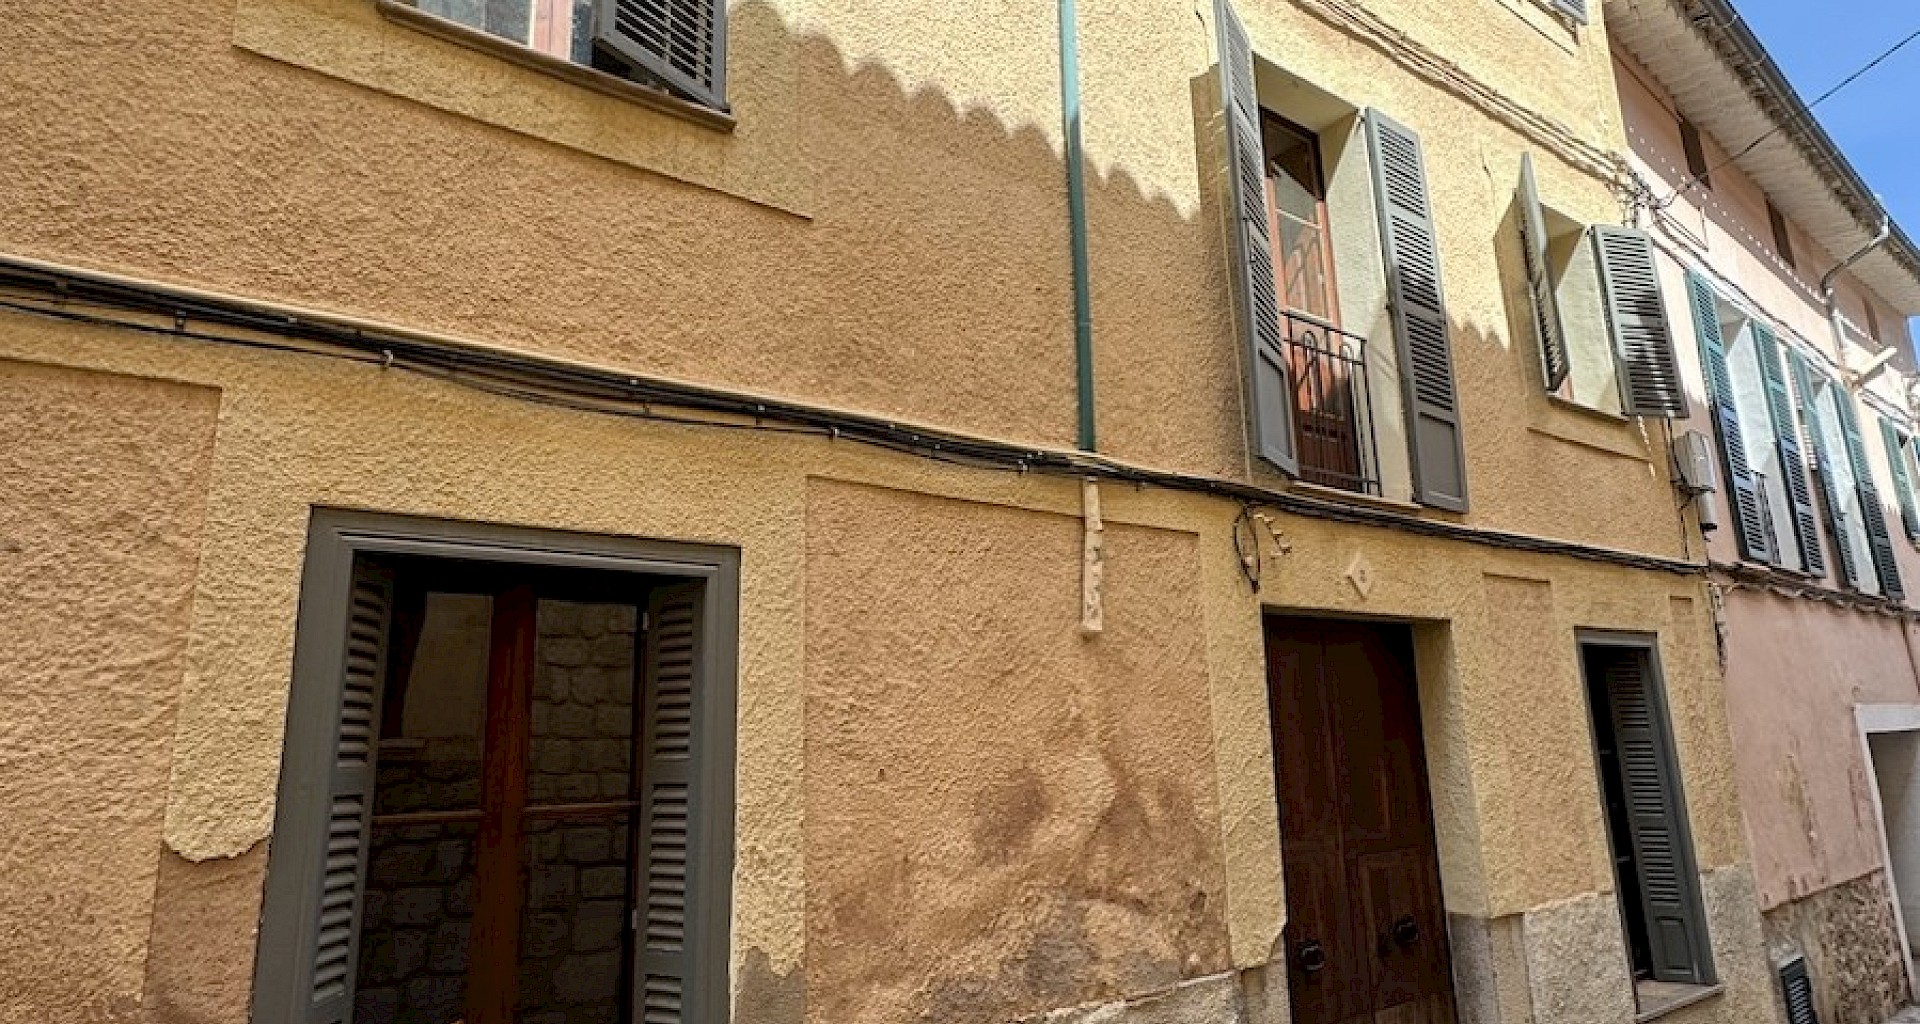 KROHN & LUEDEMANN Beautiful townhouse in Soller suitable for renovation 